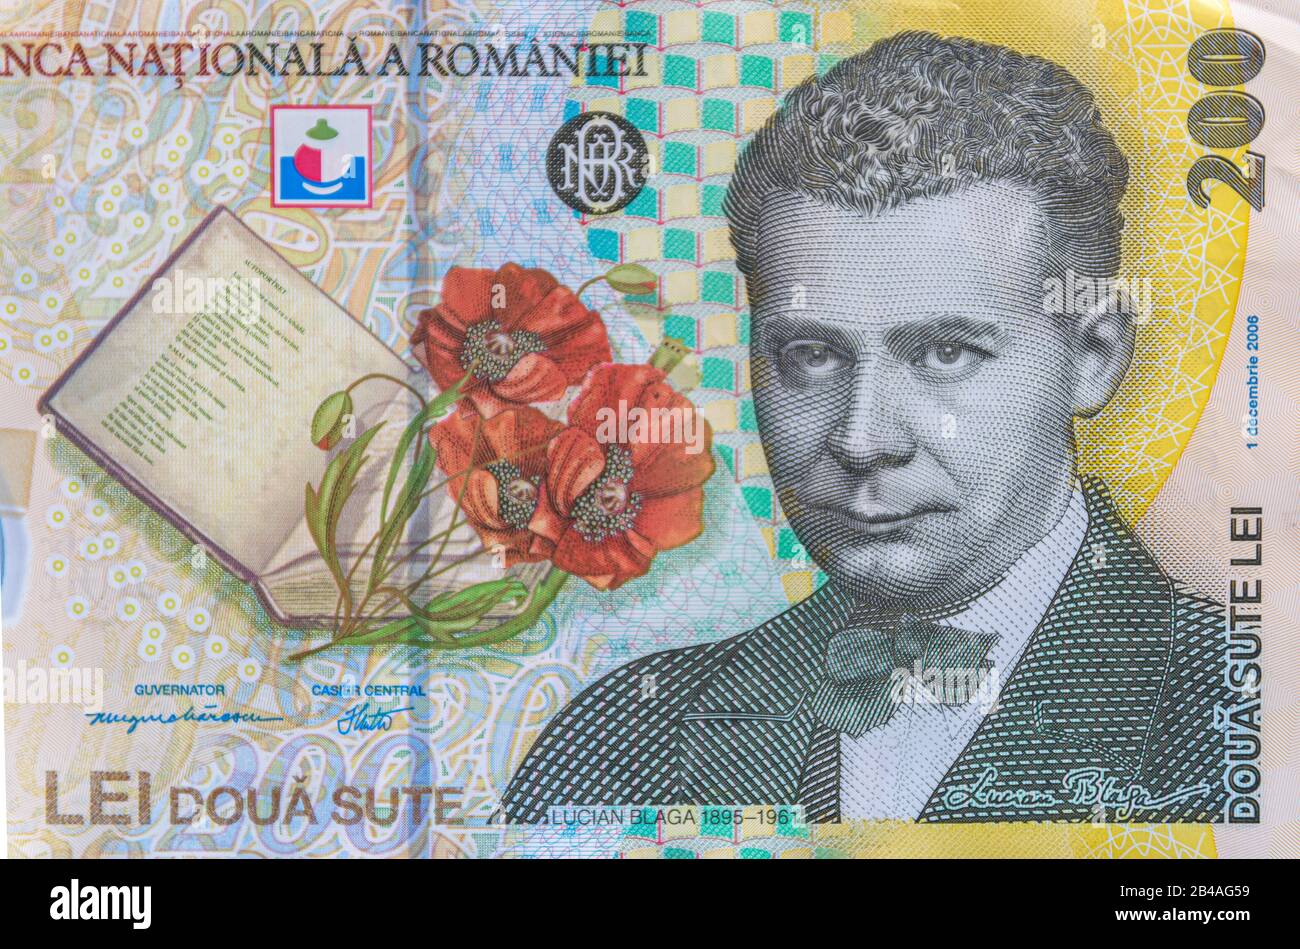 Lucian Blaga portrait on the 200 RON banknote. Coloseup of RON, Romanian Currency. Romanian RON, Lei Banknotes issued by BNR, National Bank of Romania Stock Photo